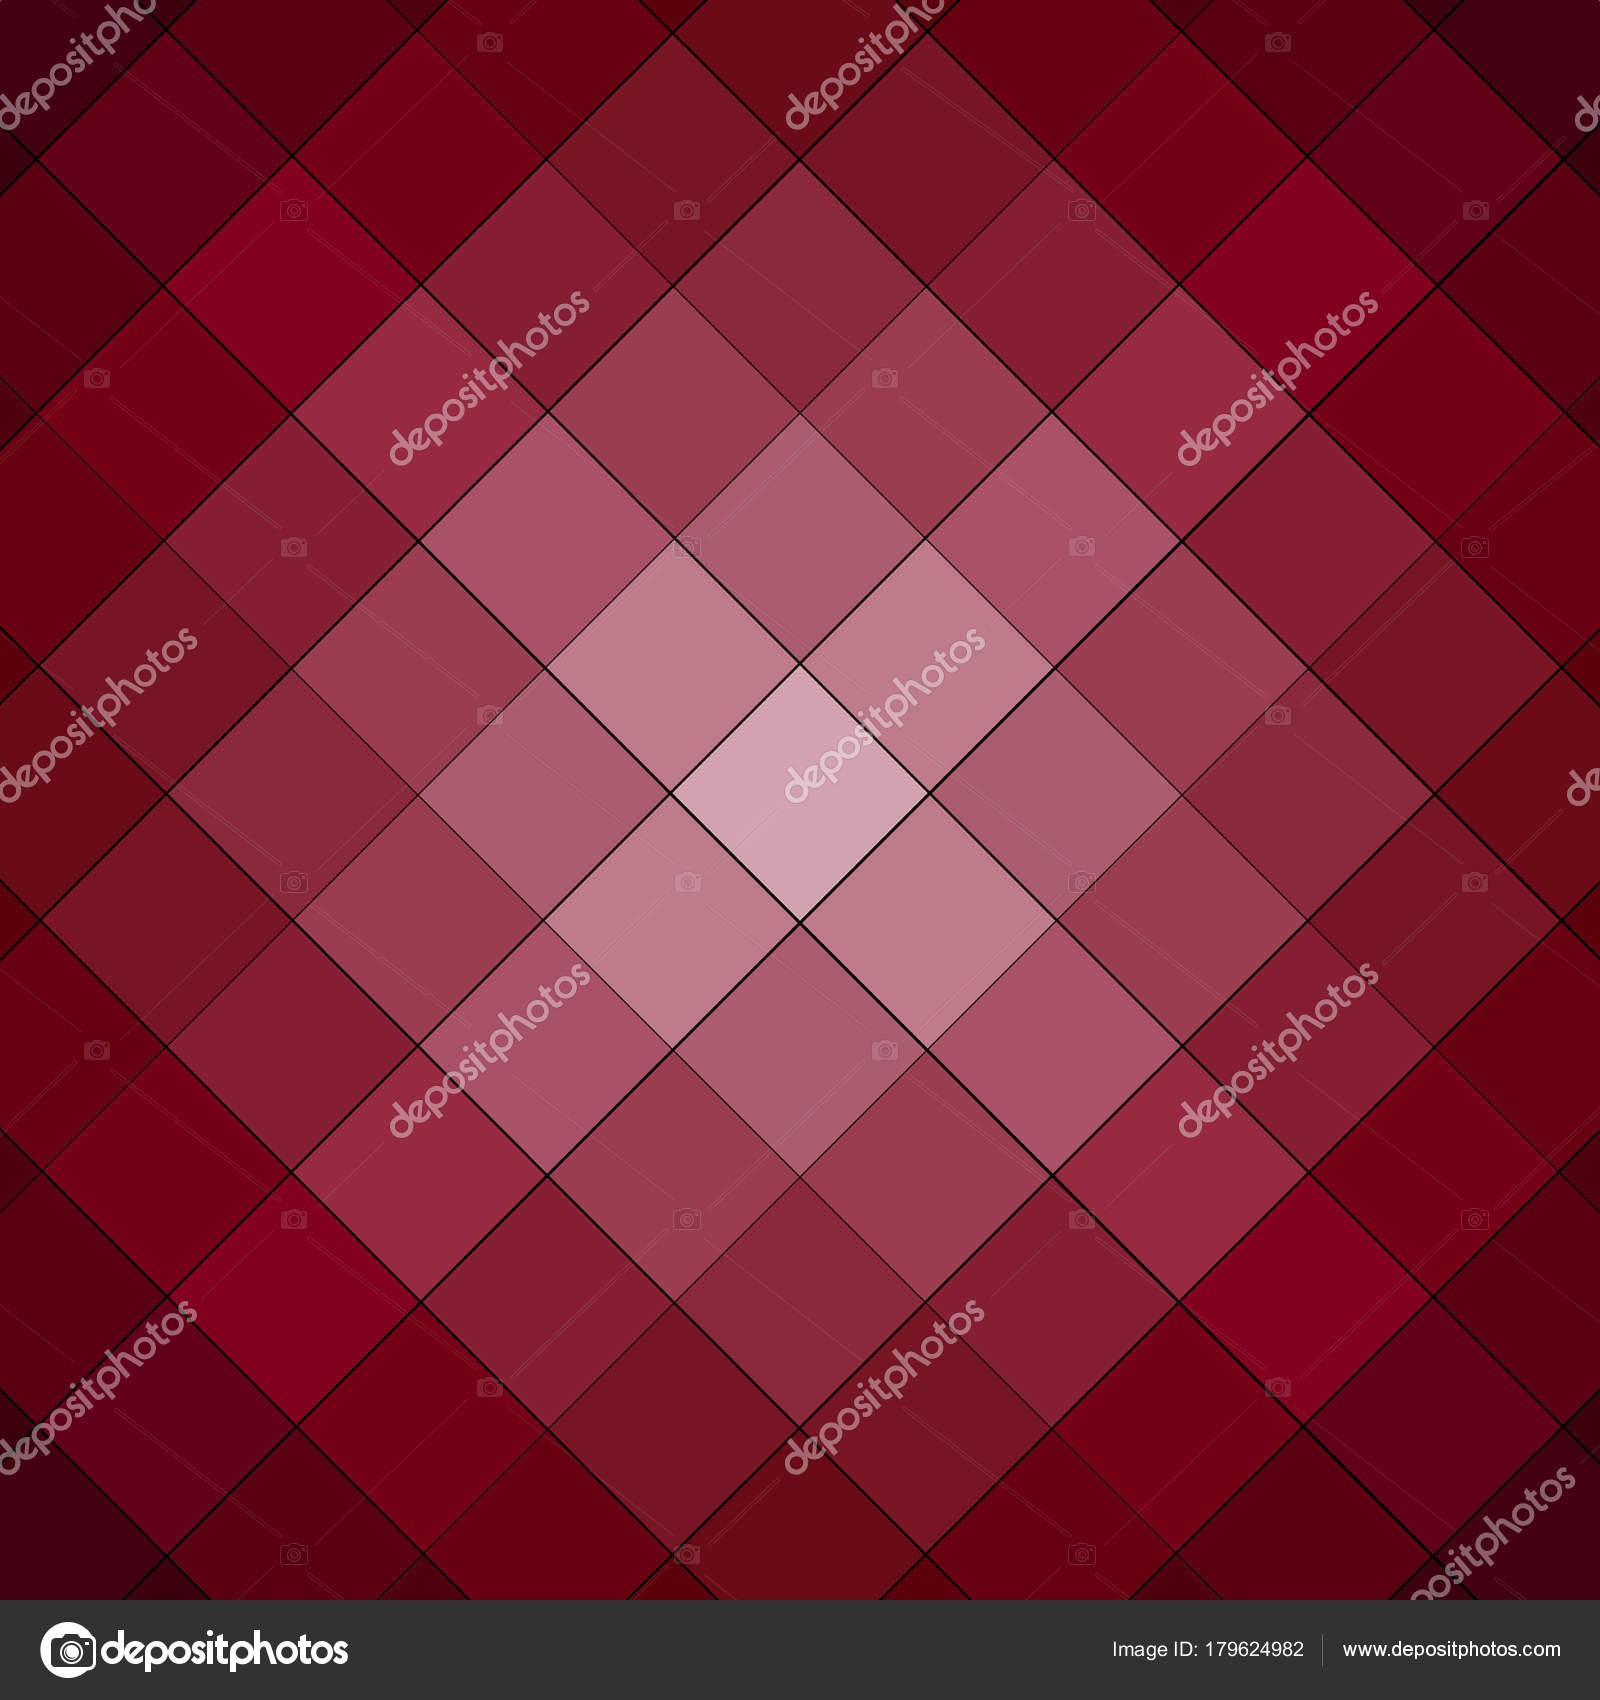 Light Dark Pink Red Faded Cube Checkered Pattern Background